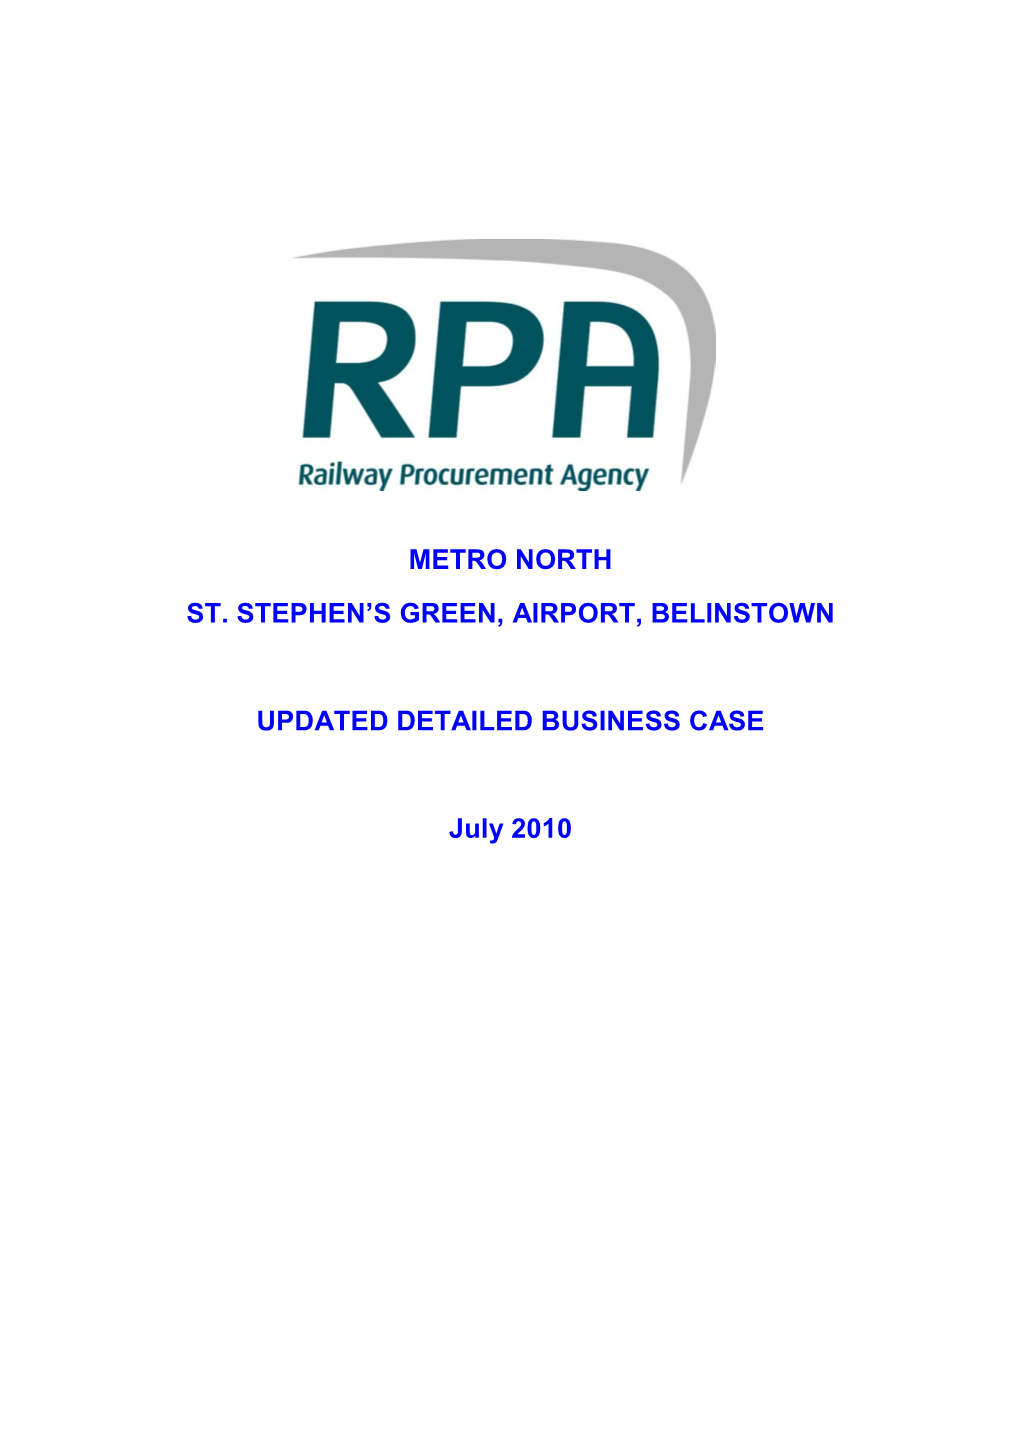 METRO NORTH ST. STEPHEN's GREEN, AIRPORT, BELINSTOWN UPDATED DETAILED BUSINESS CASE July 2010